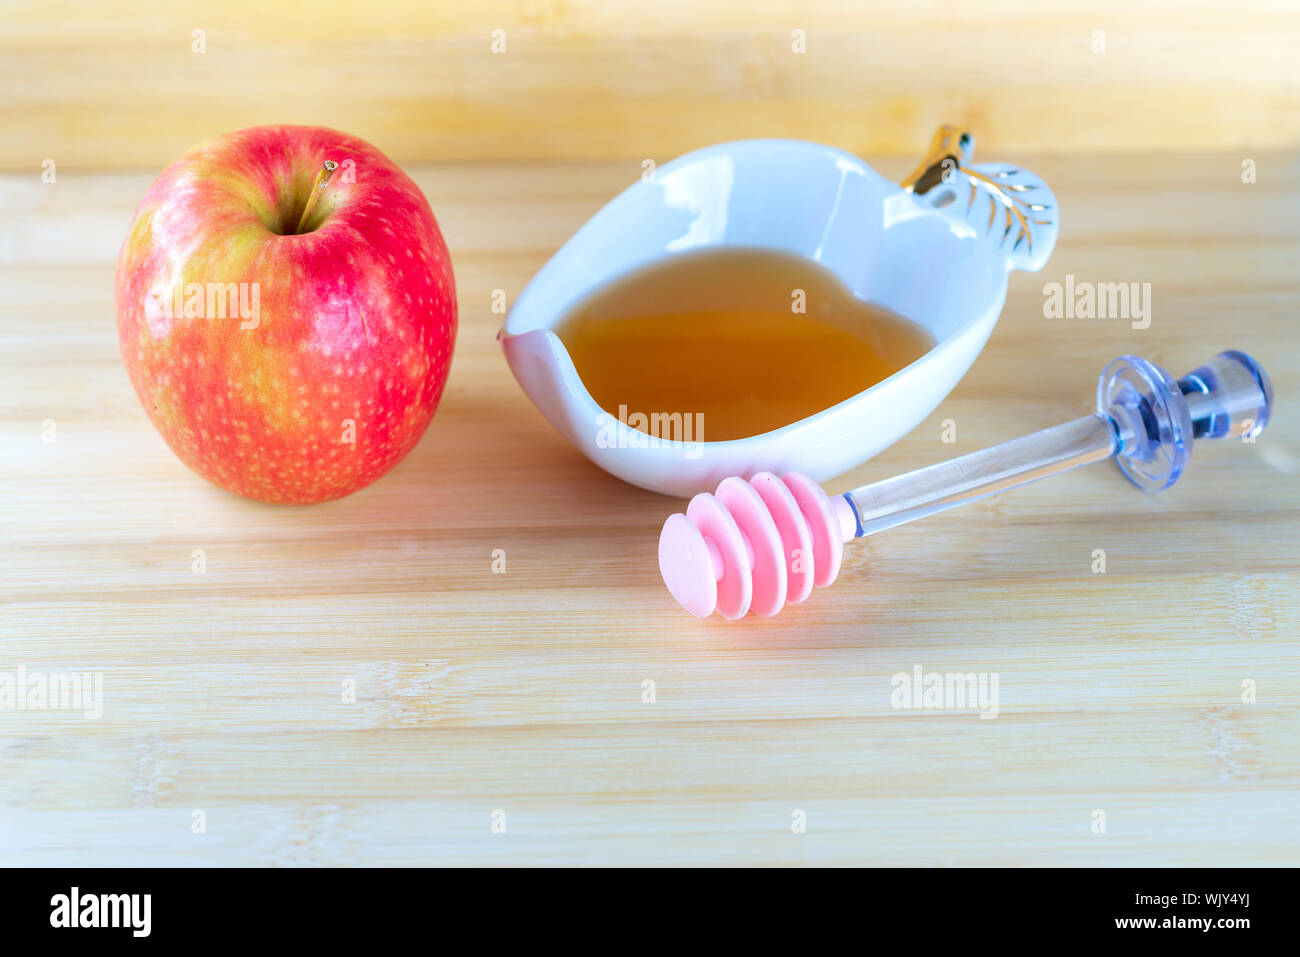 Honey and apples on wooden table background. Stock Photo